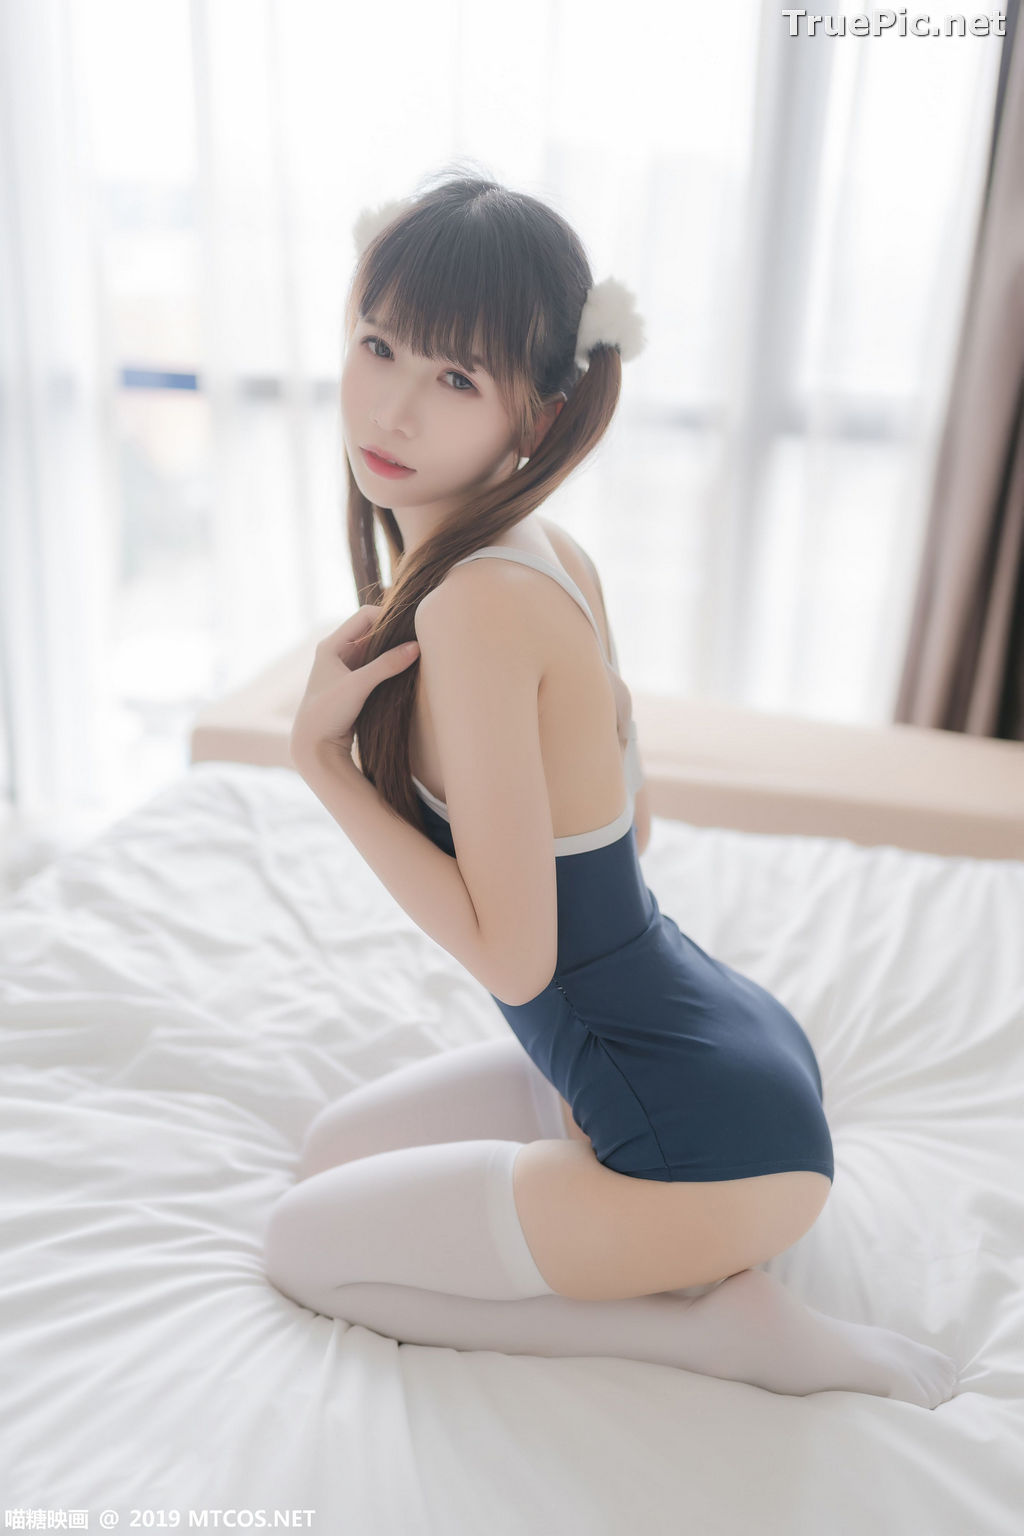 Image [MTCos] 喵糖映画 Vol.036 – Chinese Cute Model – Navy Blue Monokini and White Stockings - TruePic.net - Picture-38